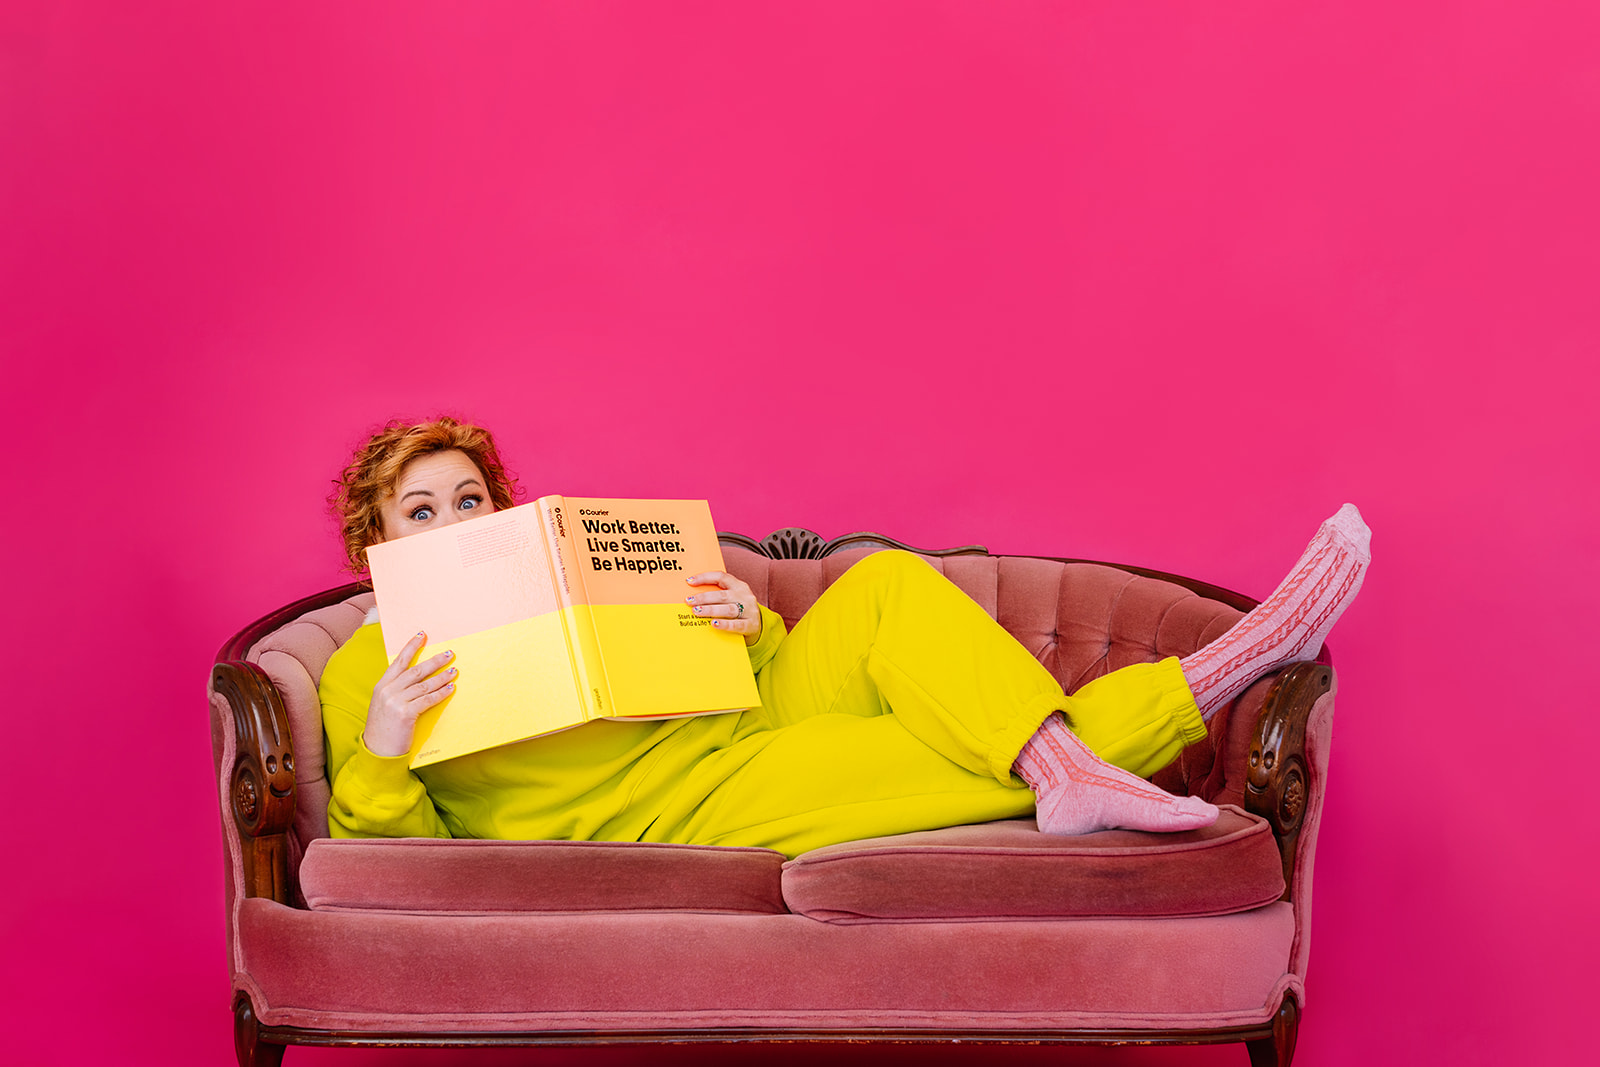 business coach on a sofa reading a book wearing neon yellow outfits in a pink backdrop